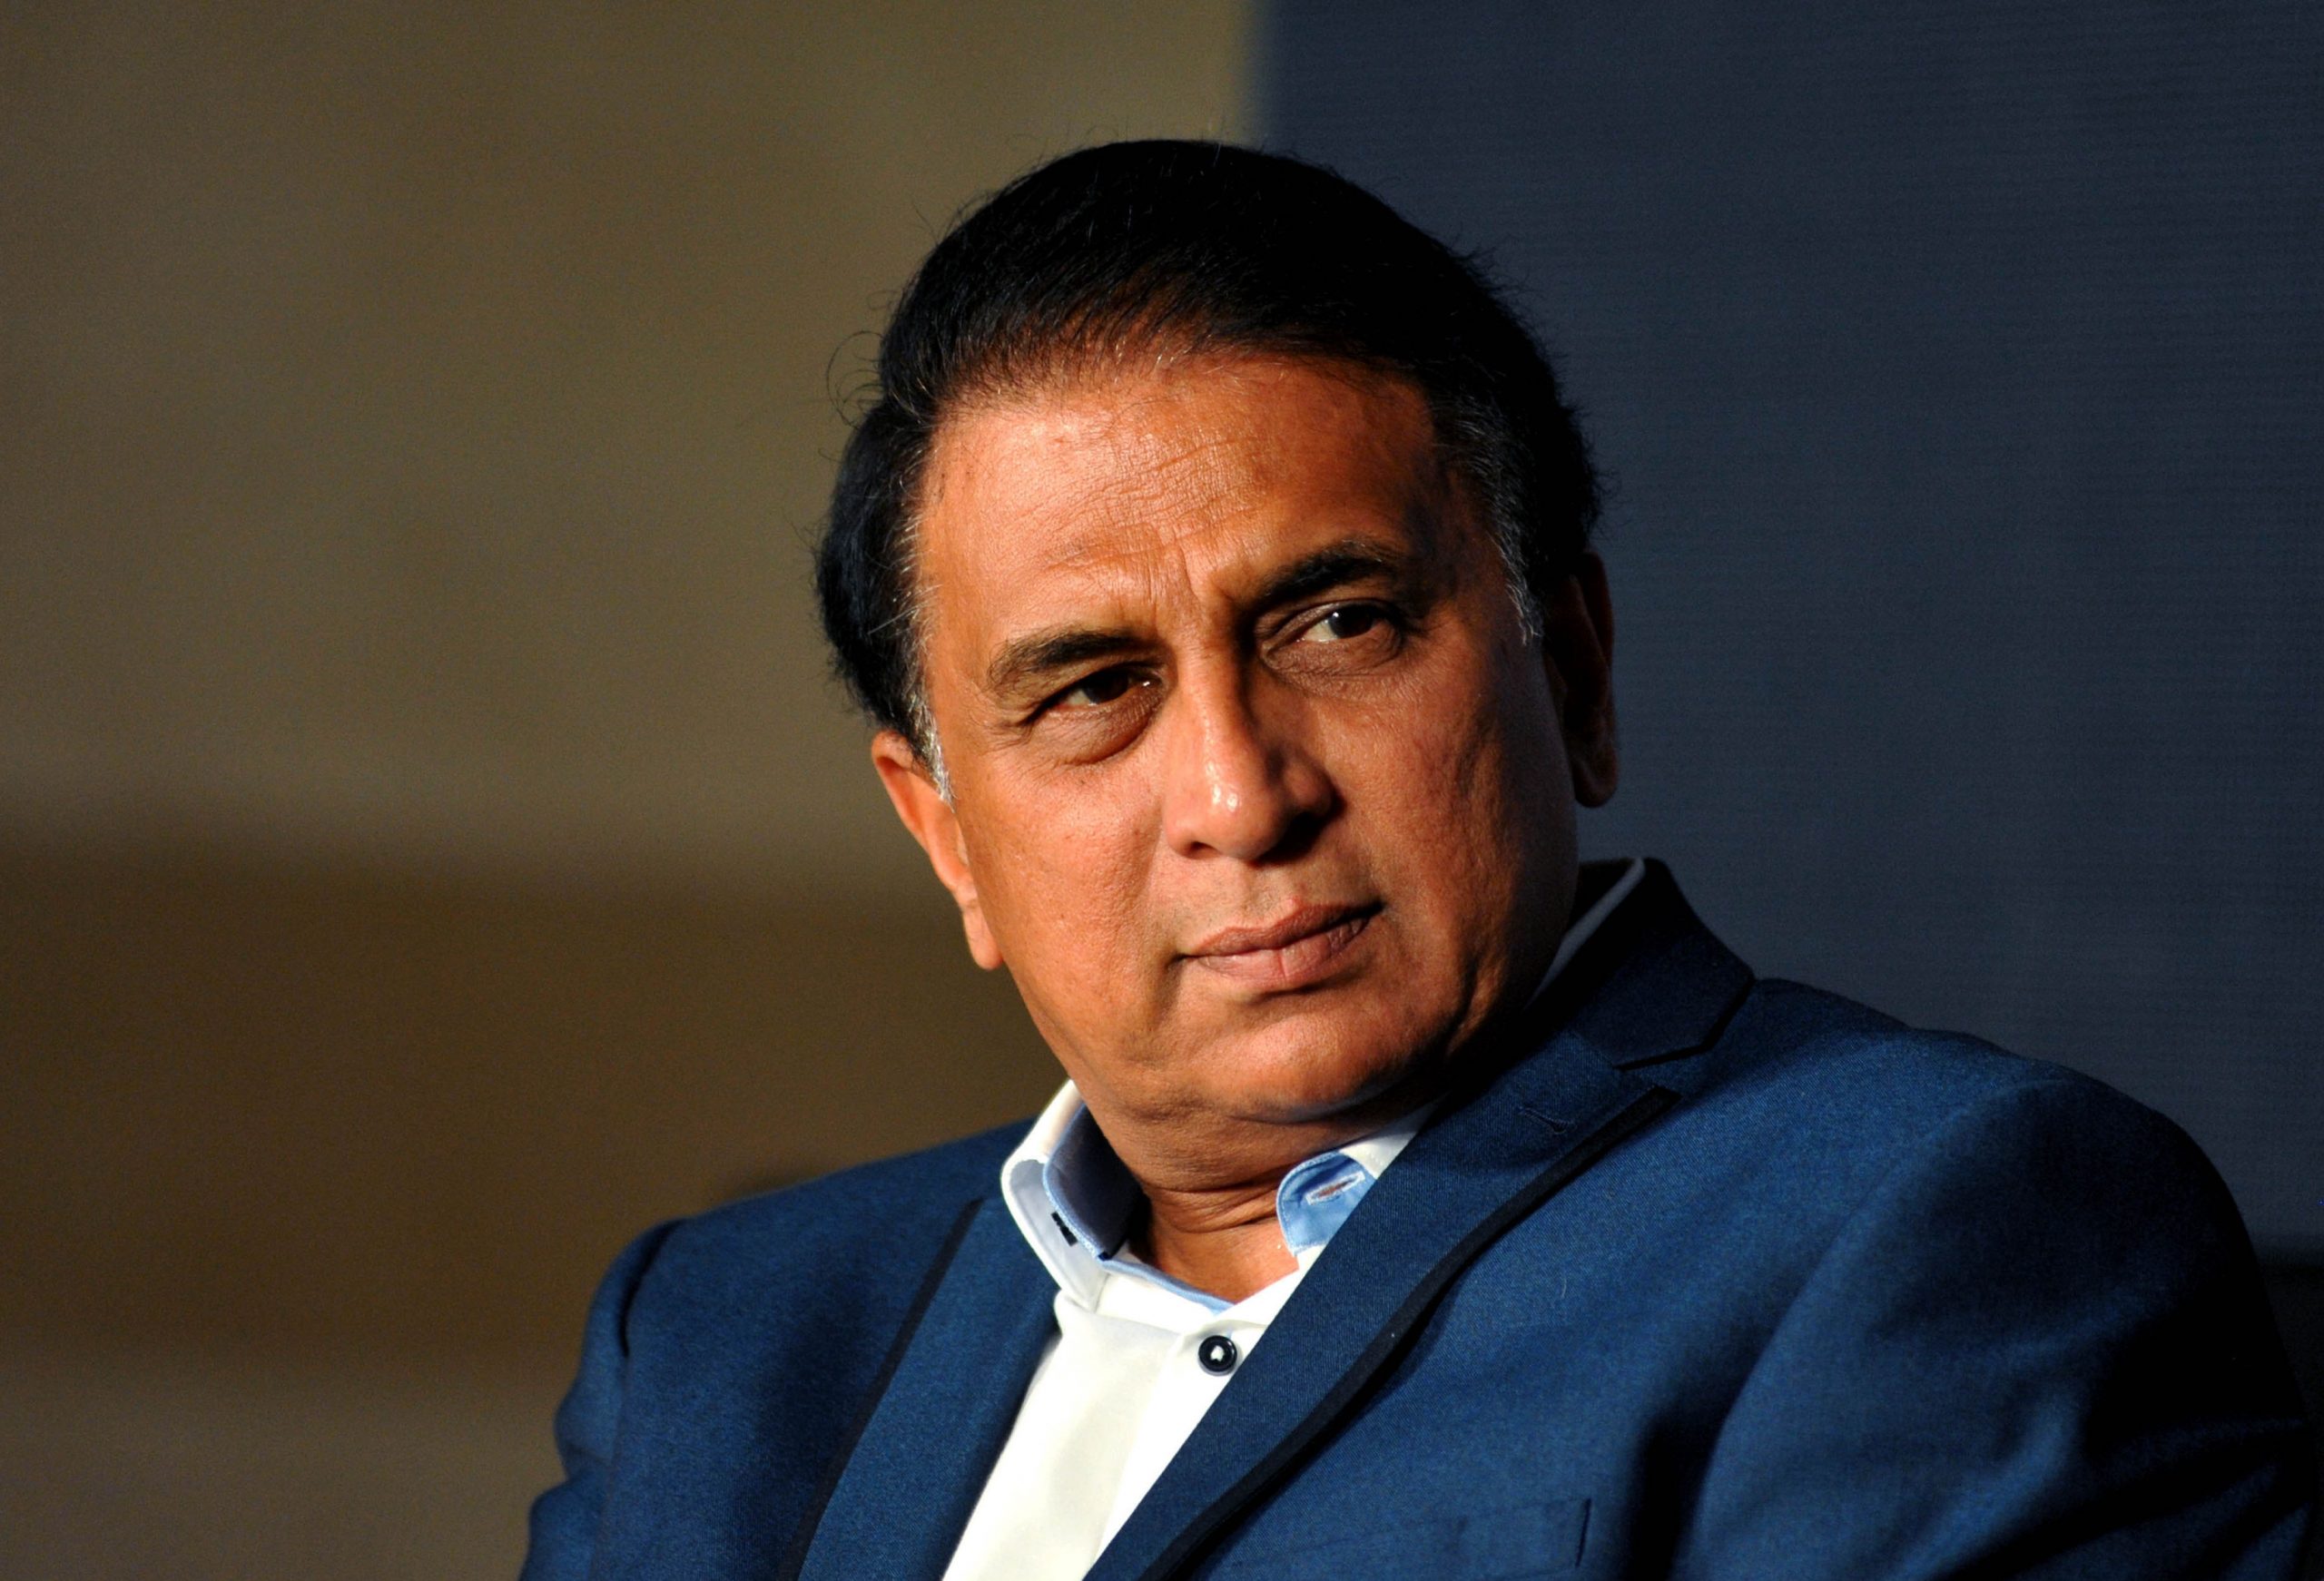 Fans’ anger is natural, want KL Rahul to open in the second test, says Sunil Gavaskar